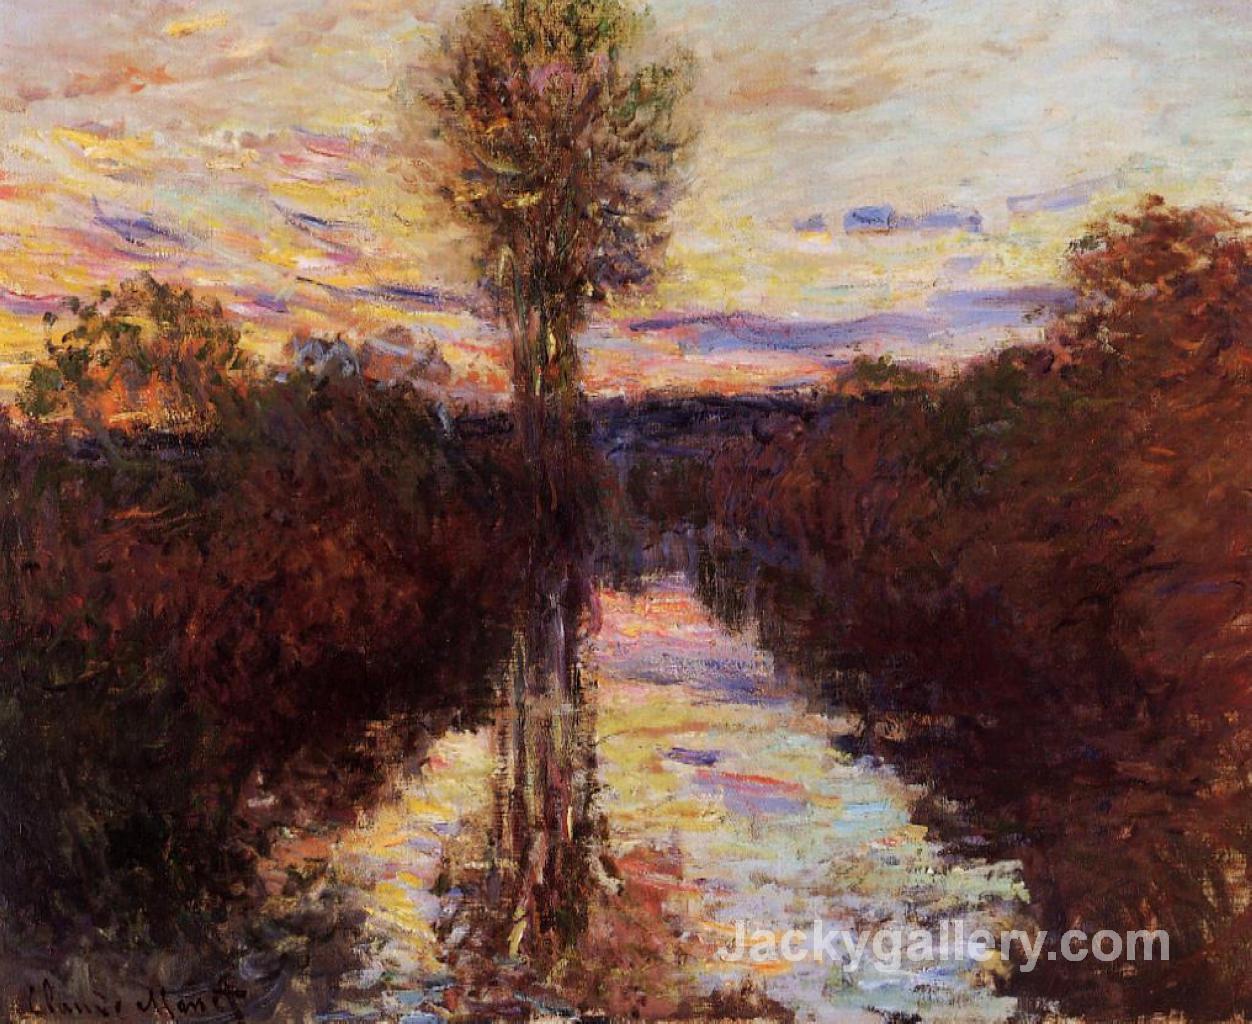 The Small Arm of the Seine at Mosseaux, Evening by Claude Monet paintings reproduction